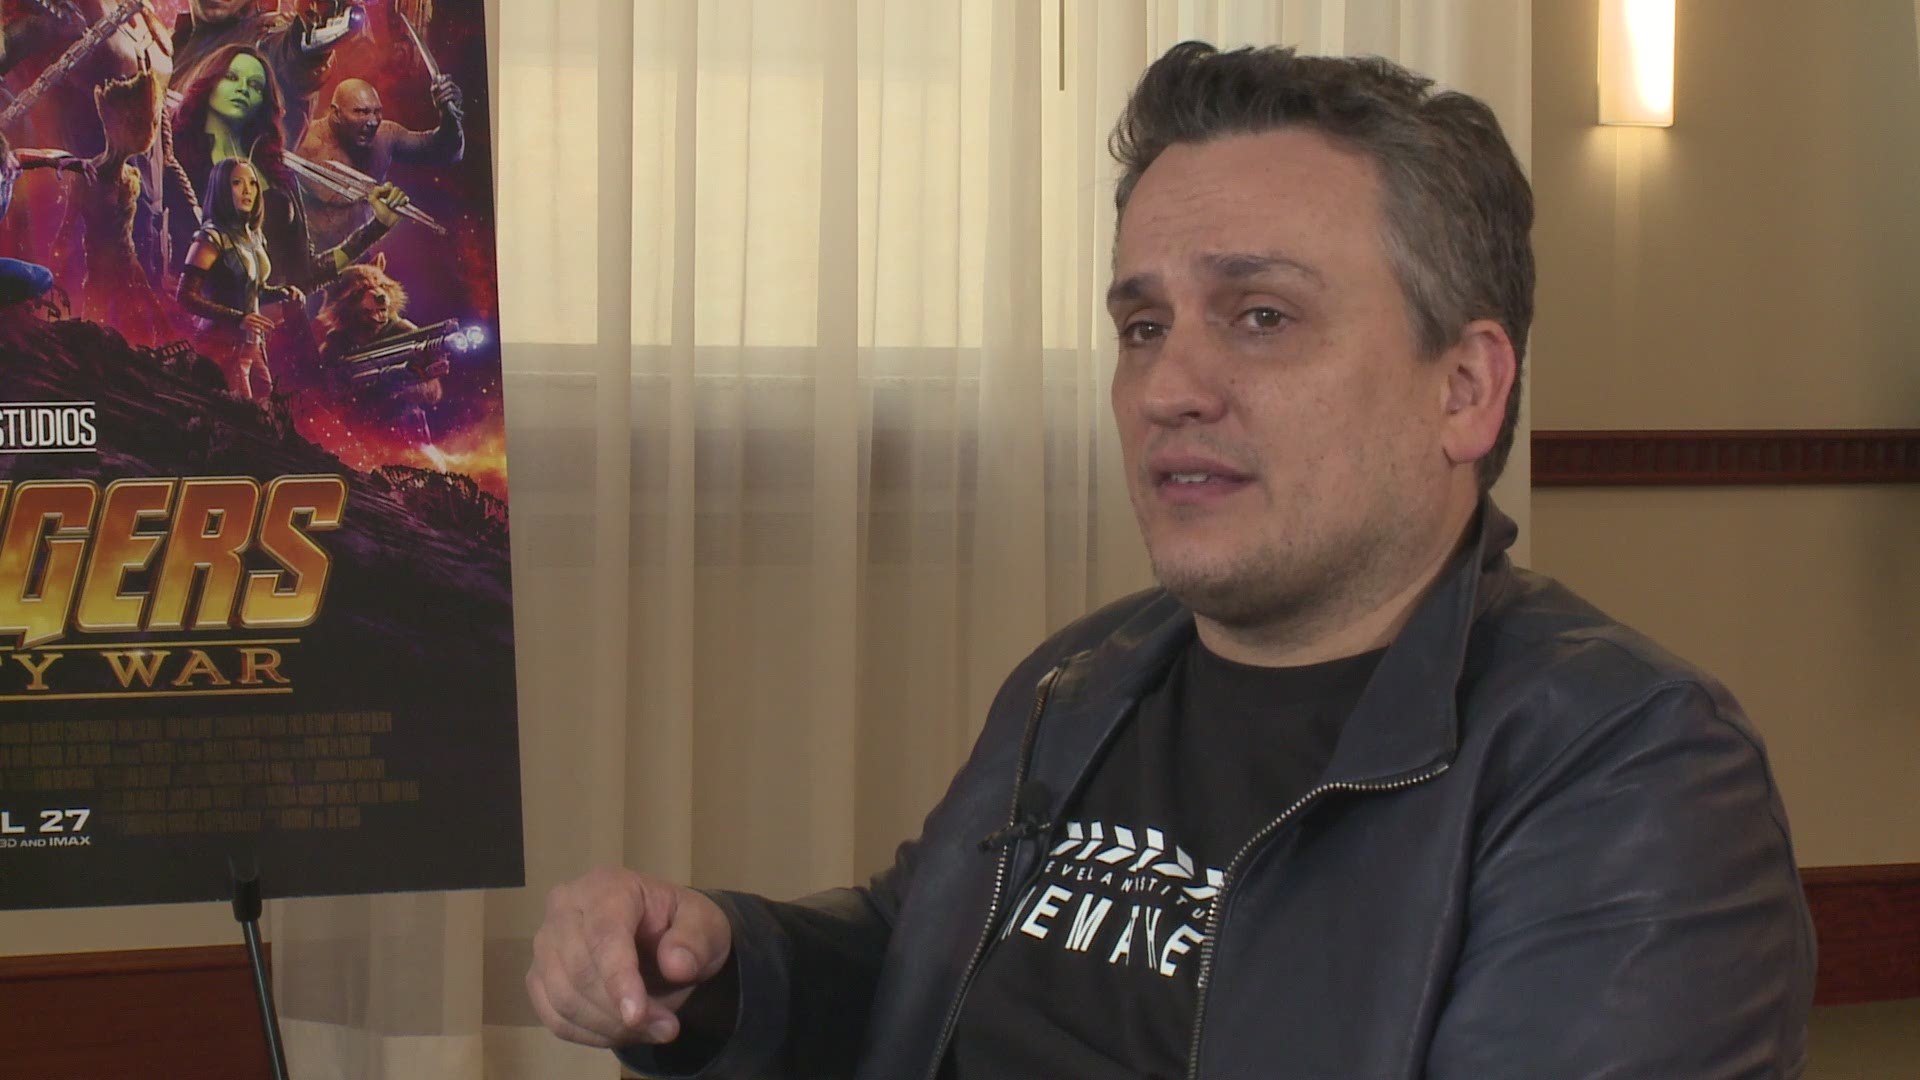 Extended interview with Cleveland's own Russo Brothers